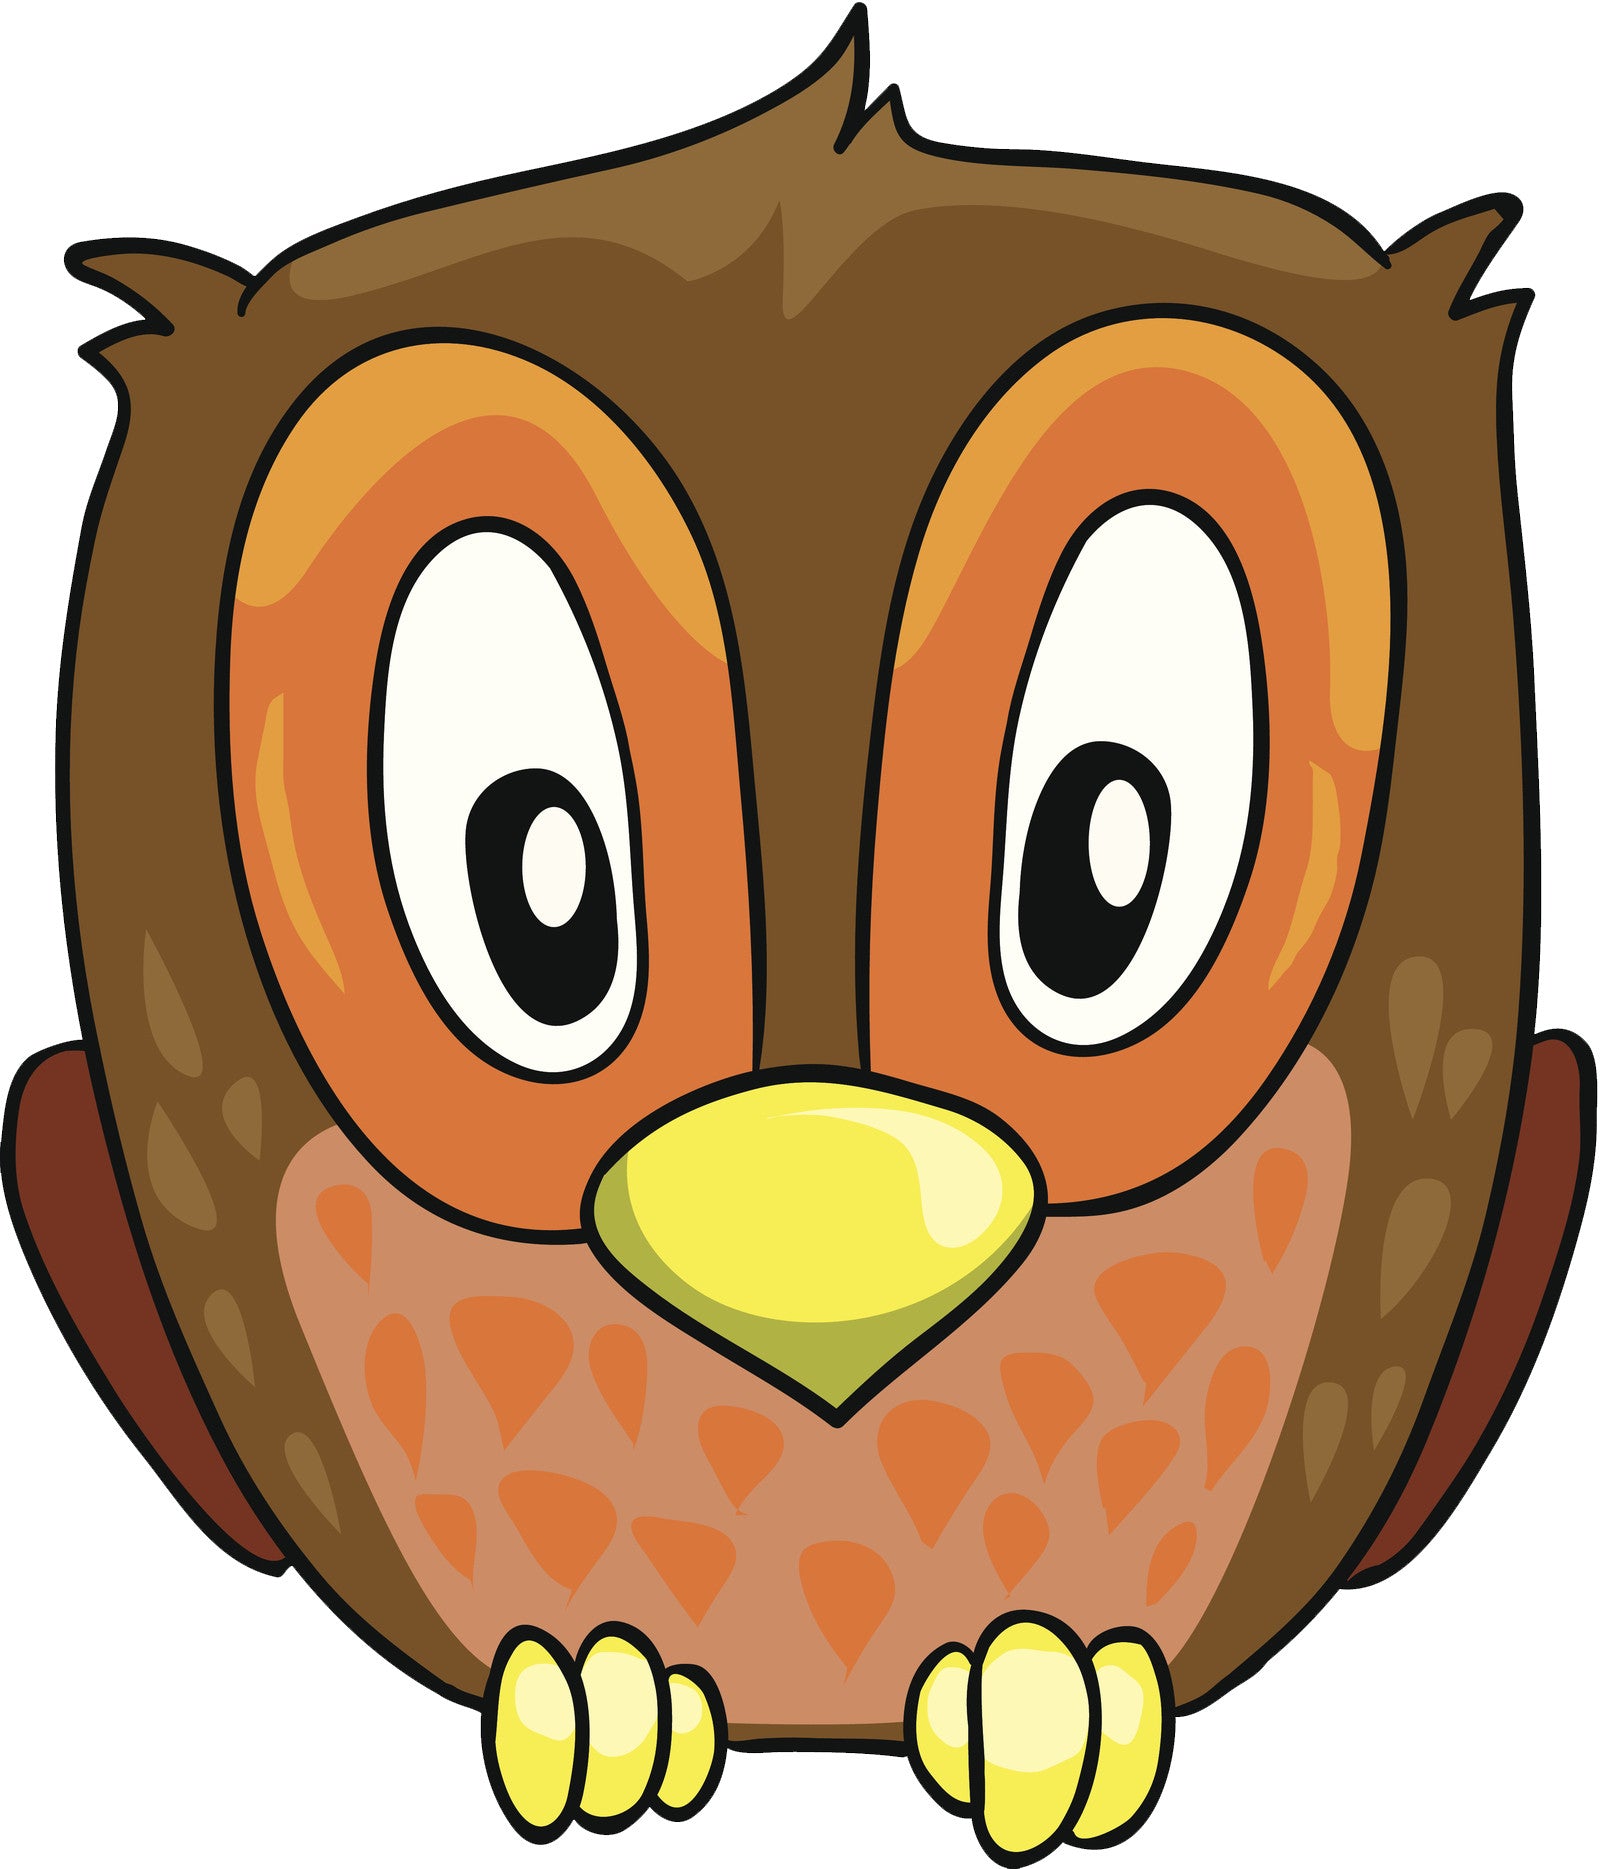 Adorable Baby Owl with Large Eyes Cartoon Vinyl Decal Sticker